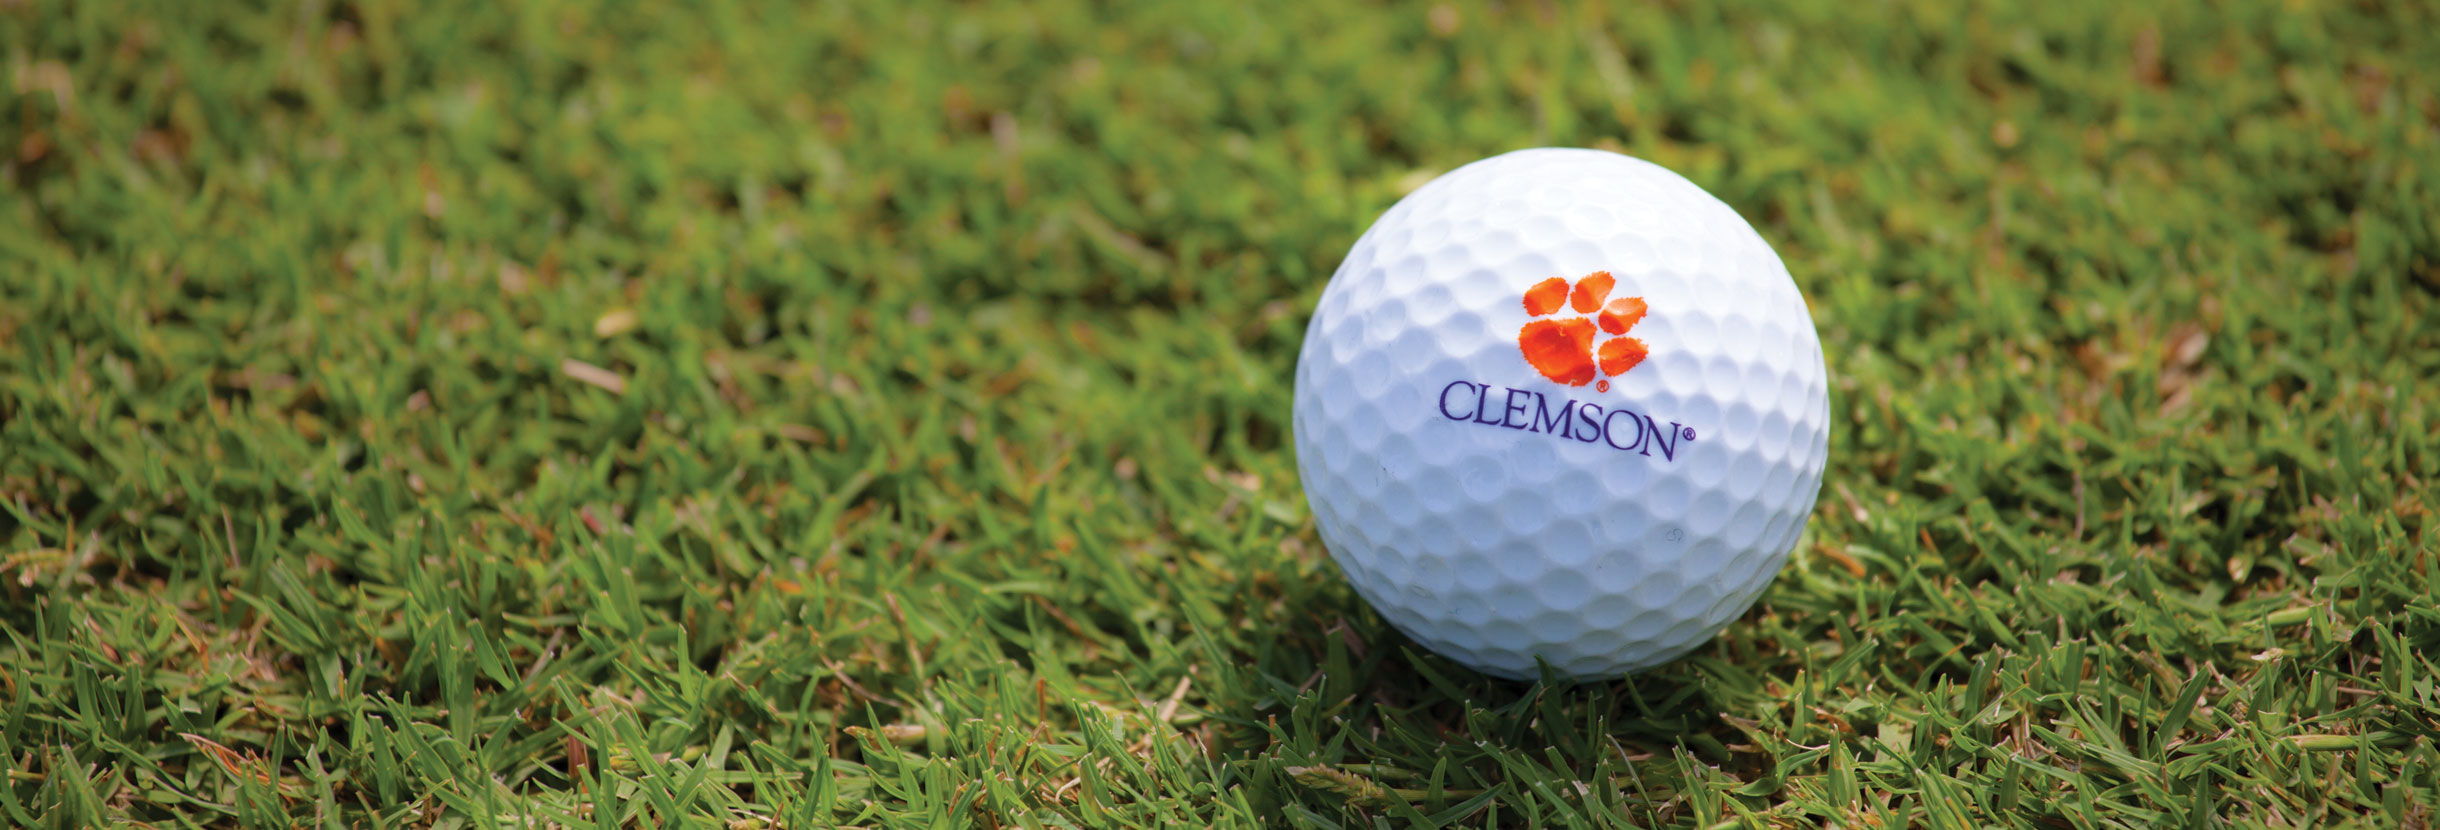 Clemson golf ball seating in the turfgrass